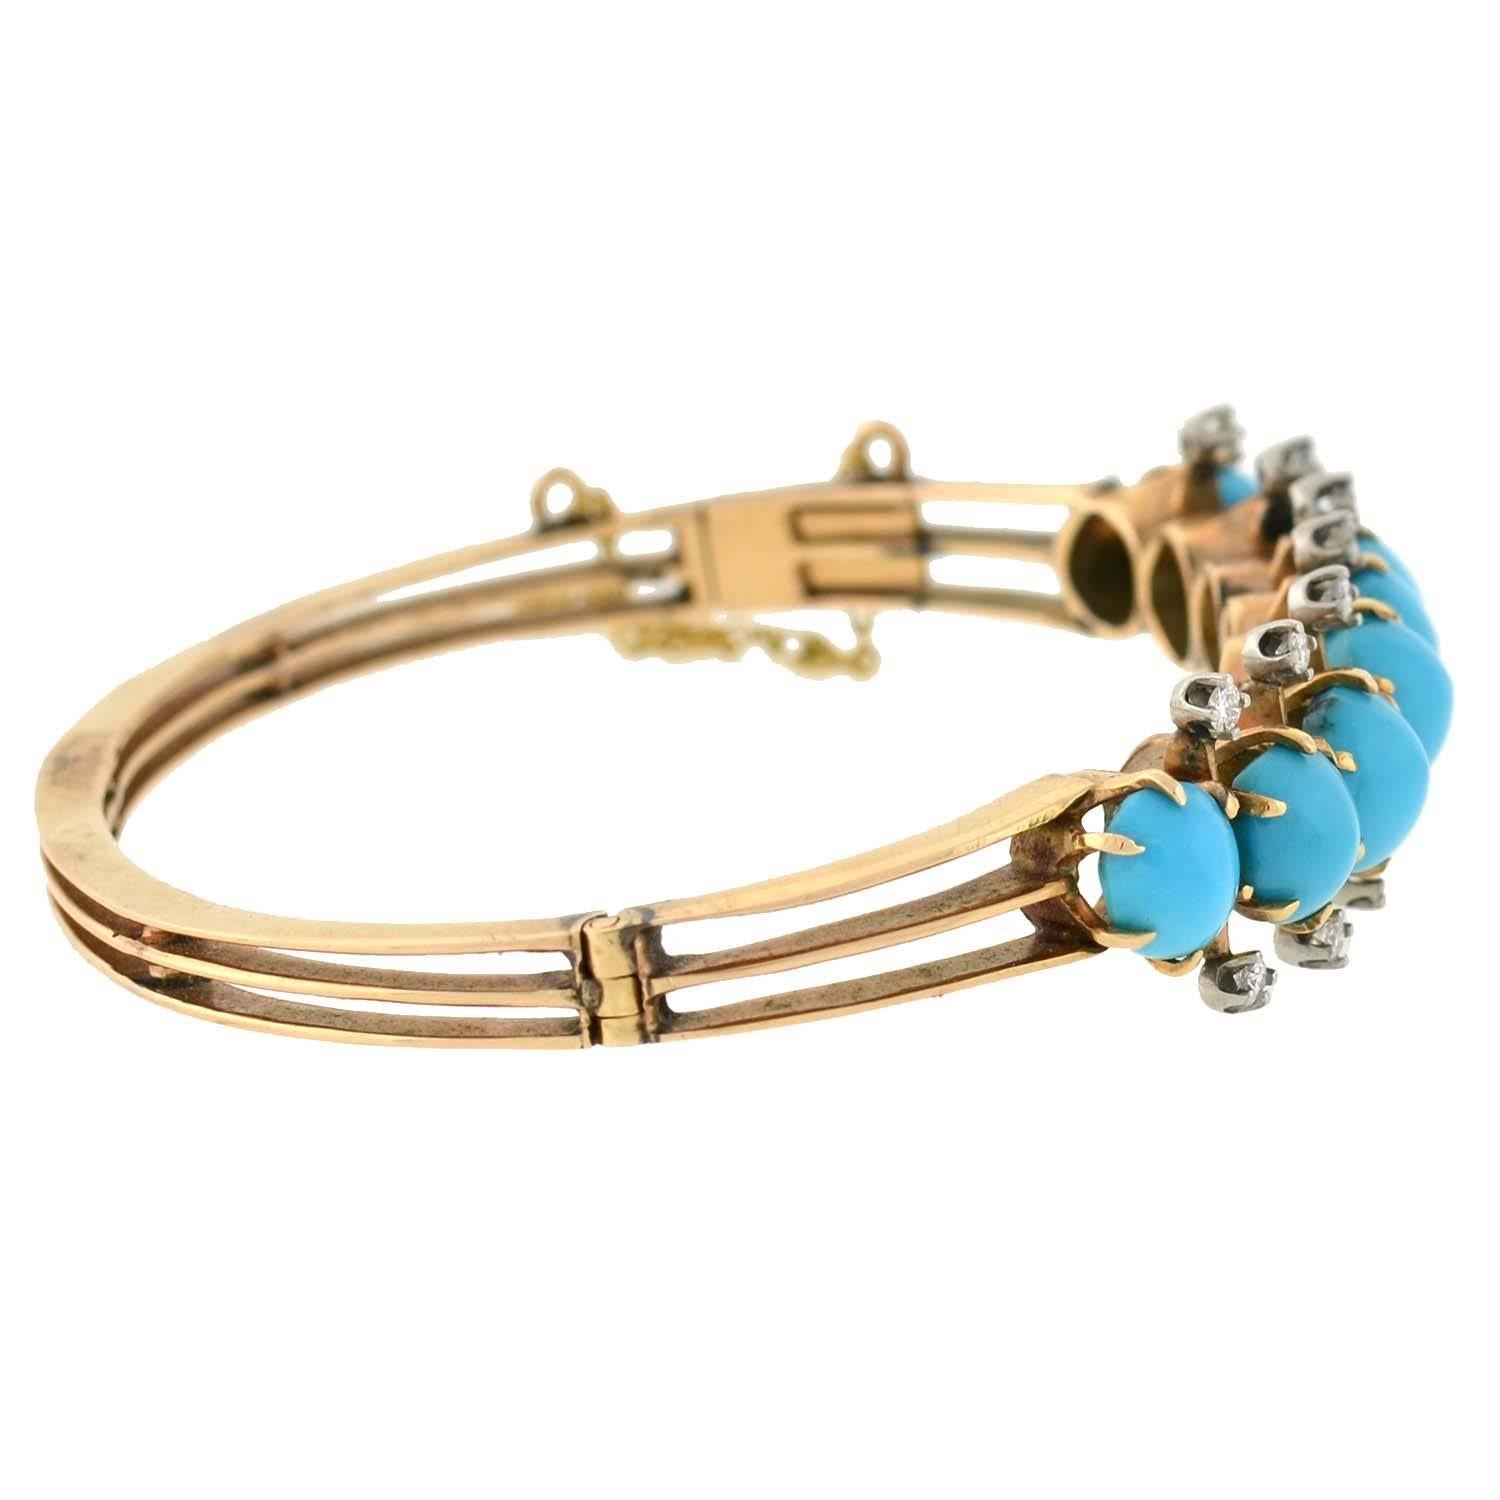 An absolutely gorgeous gold bangle bracelet from the Victorian (ca1880) era! This beautiful piece is made of 14kt yellow gold and is detailed with a row of 8 vibrant Persian turquoise stones set along the front. Resting above and below in between